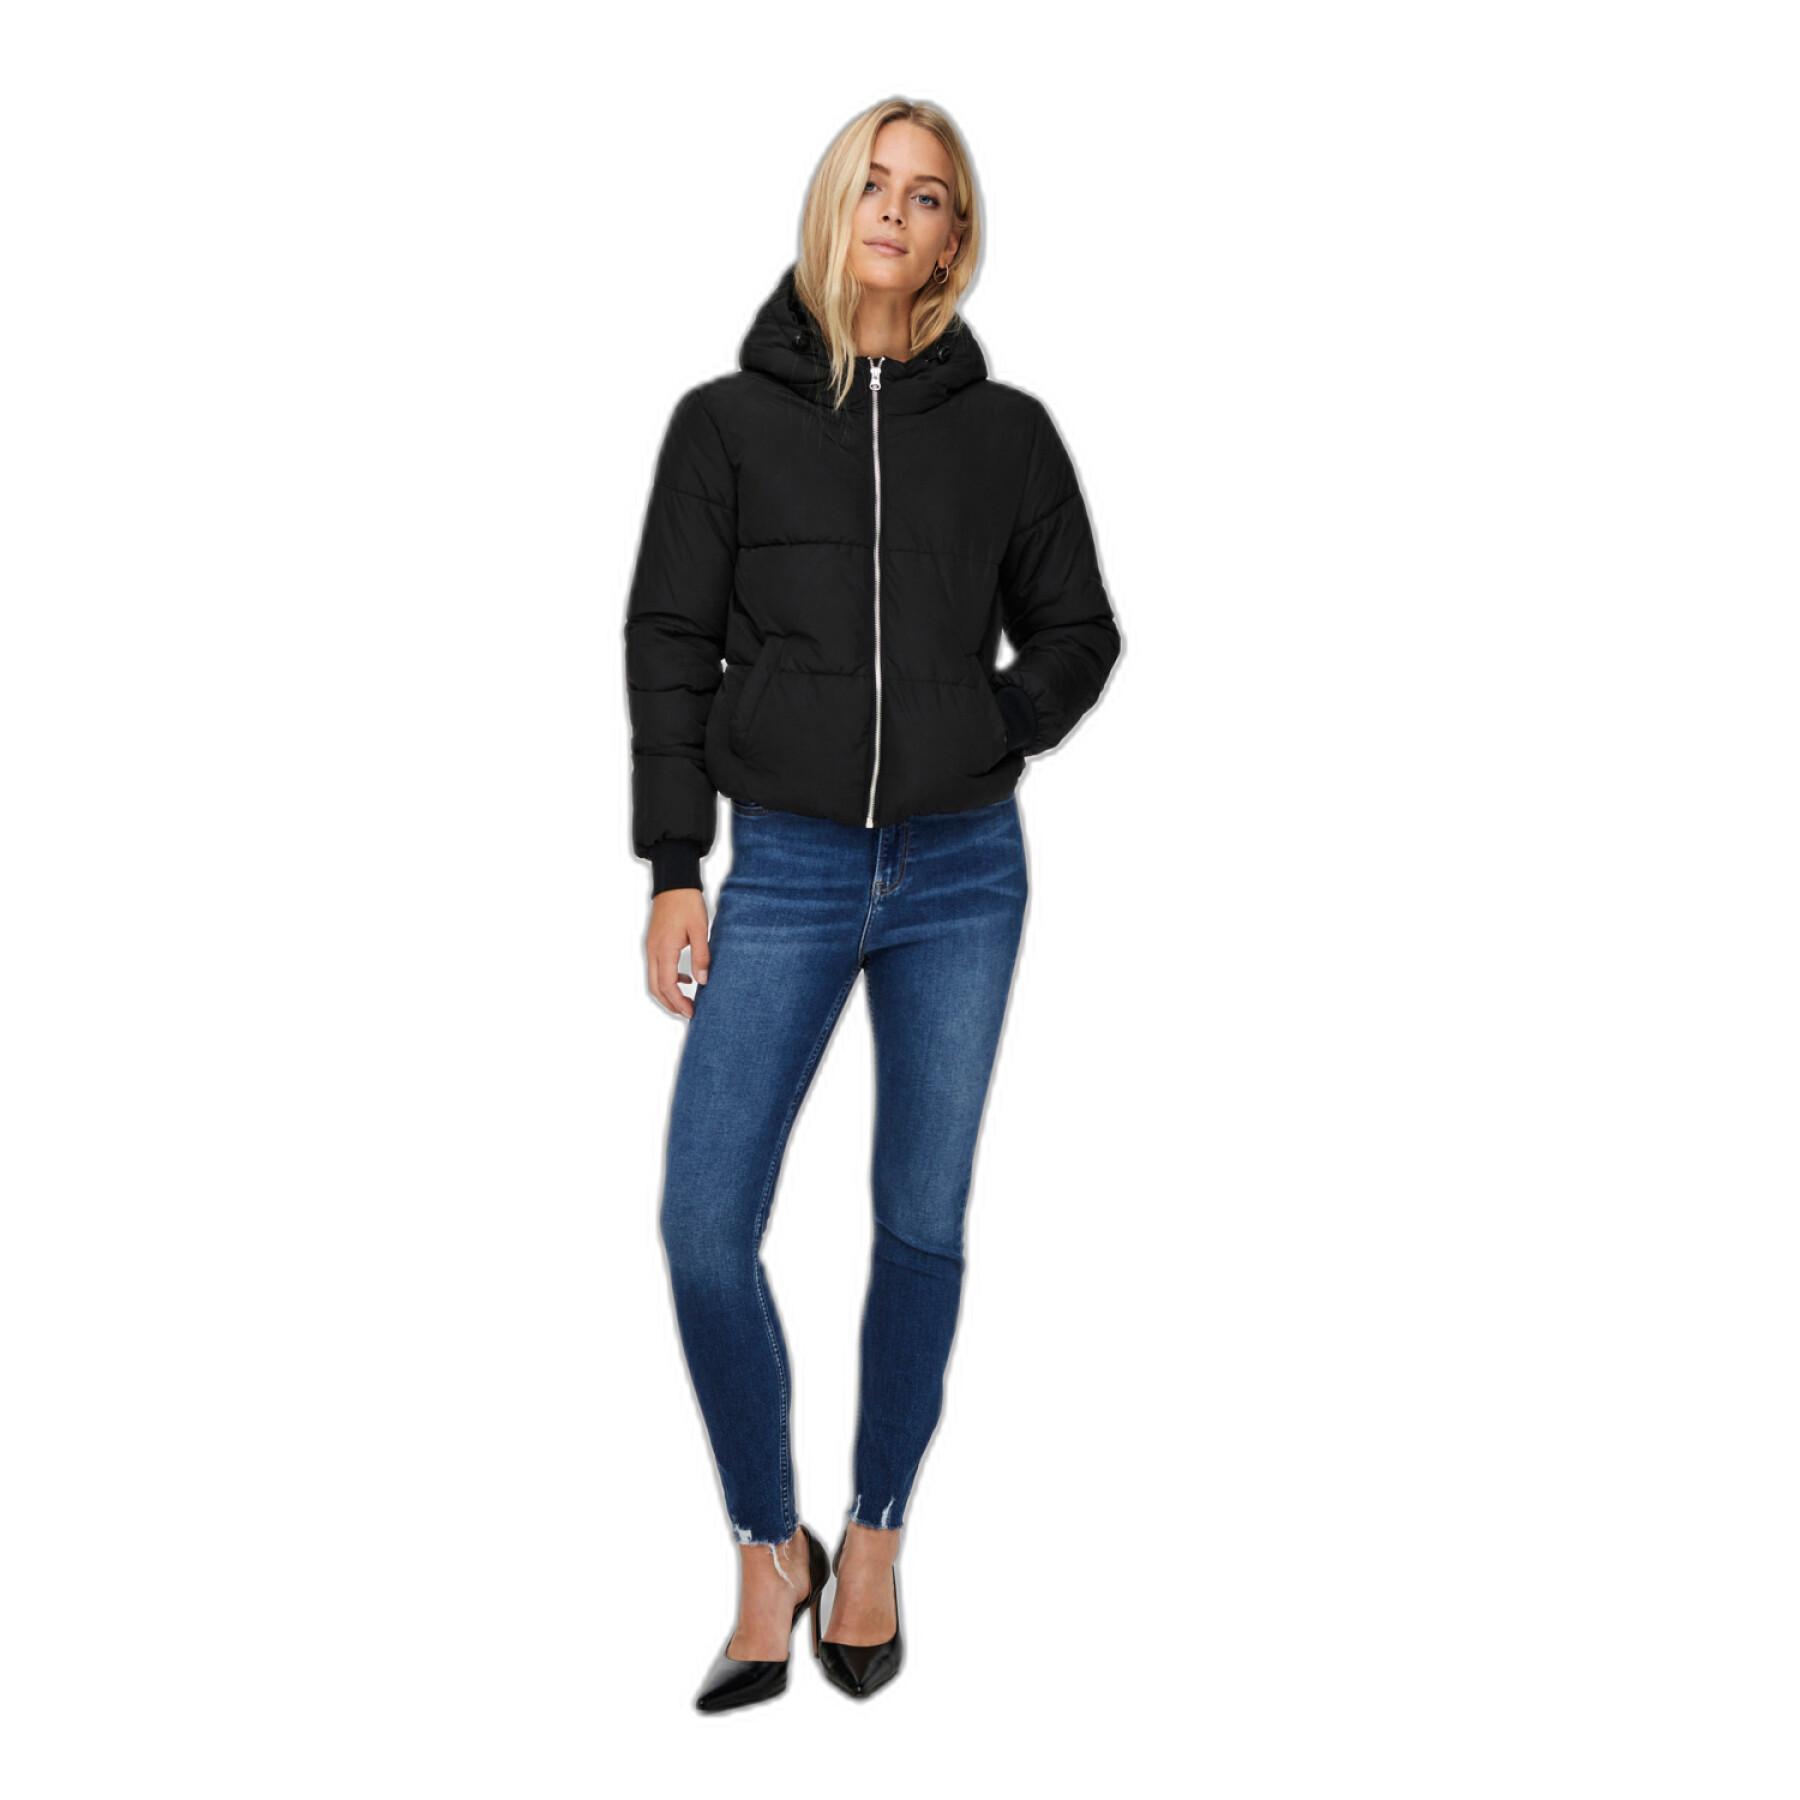 ShortHooded Puffer Jacket for women JDY Newerica